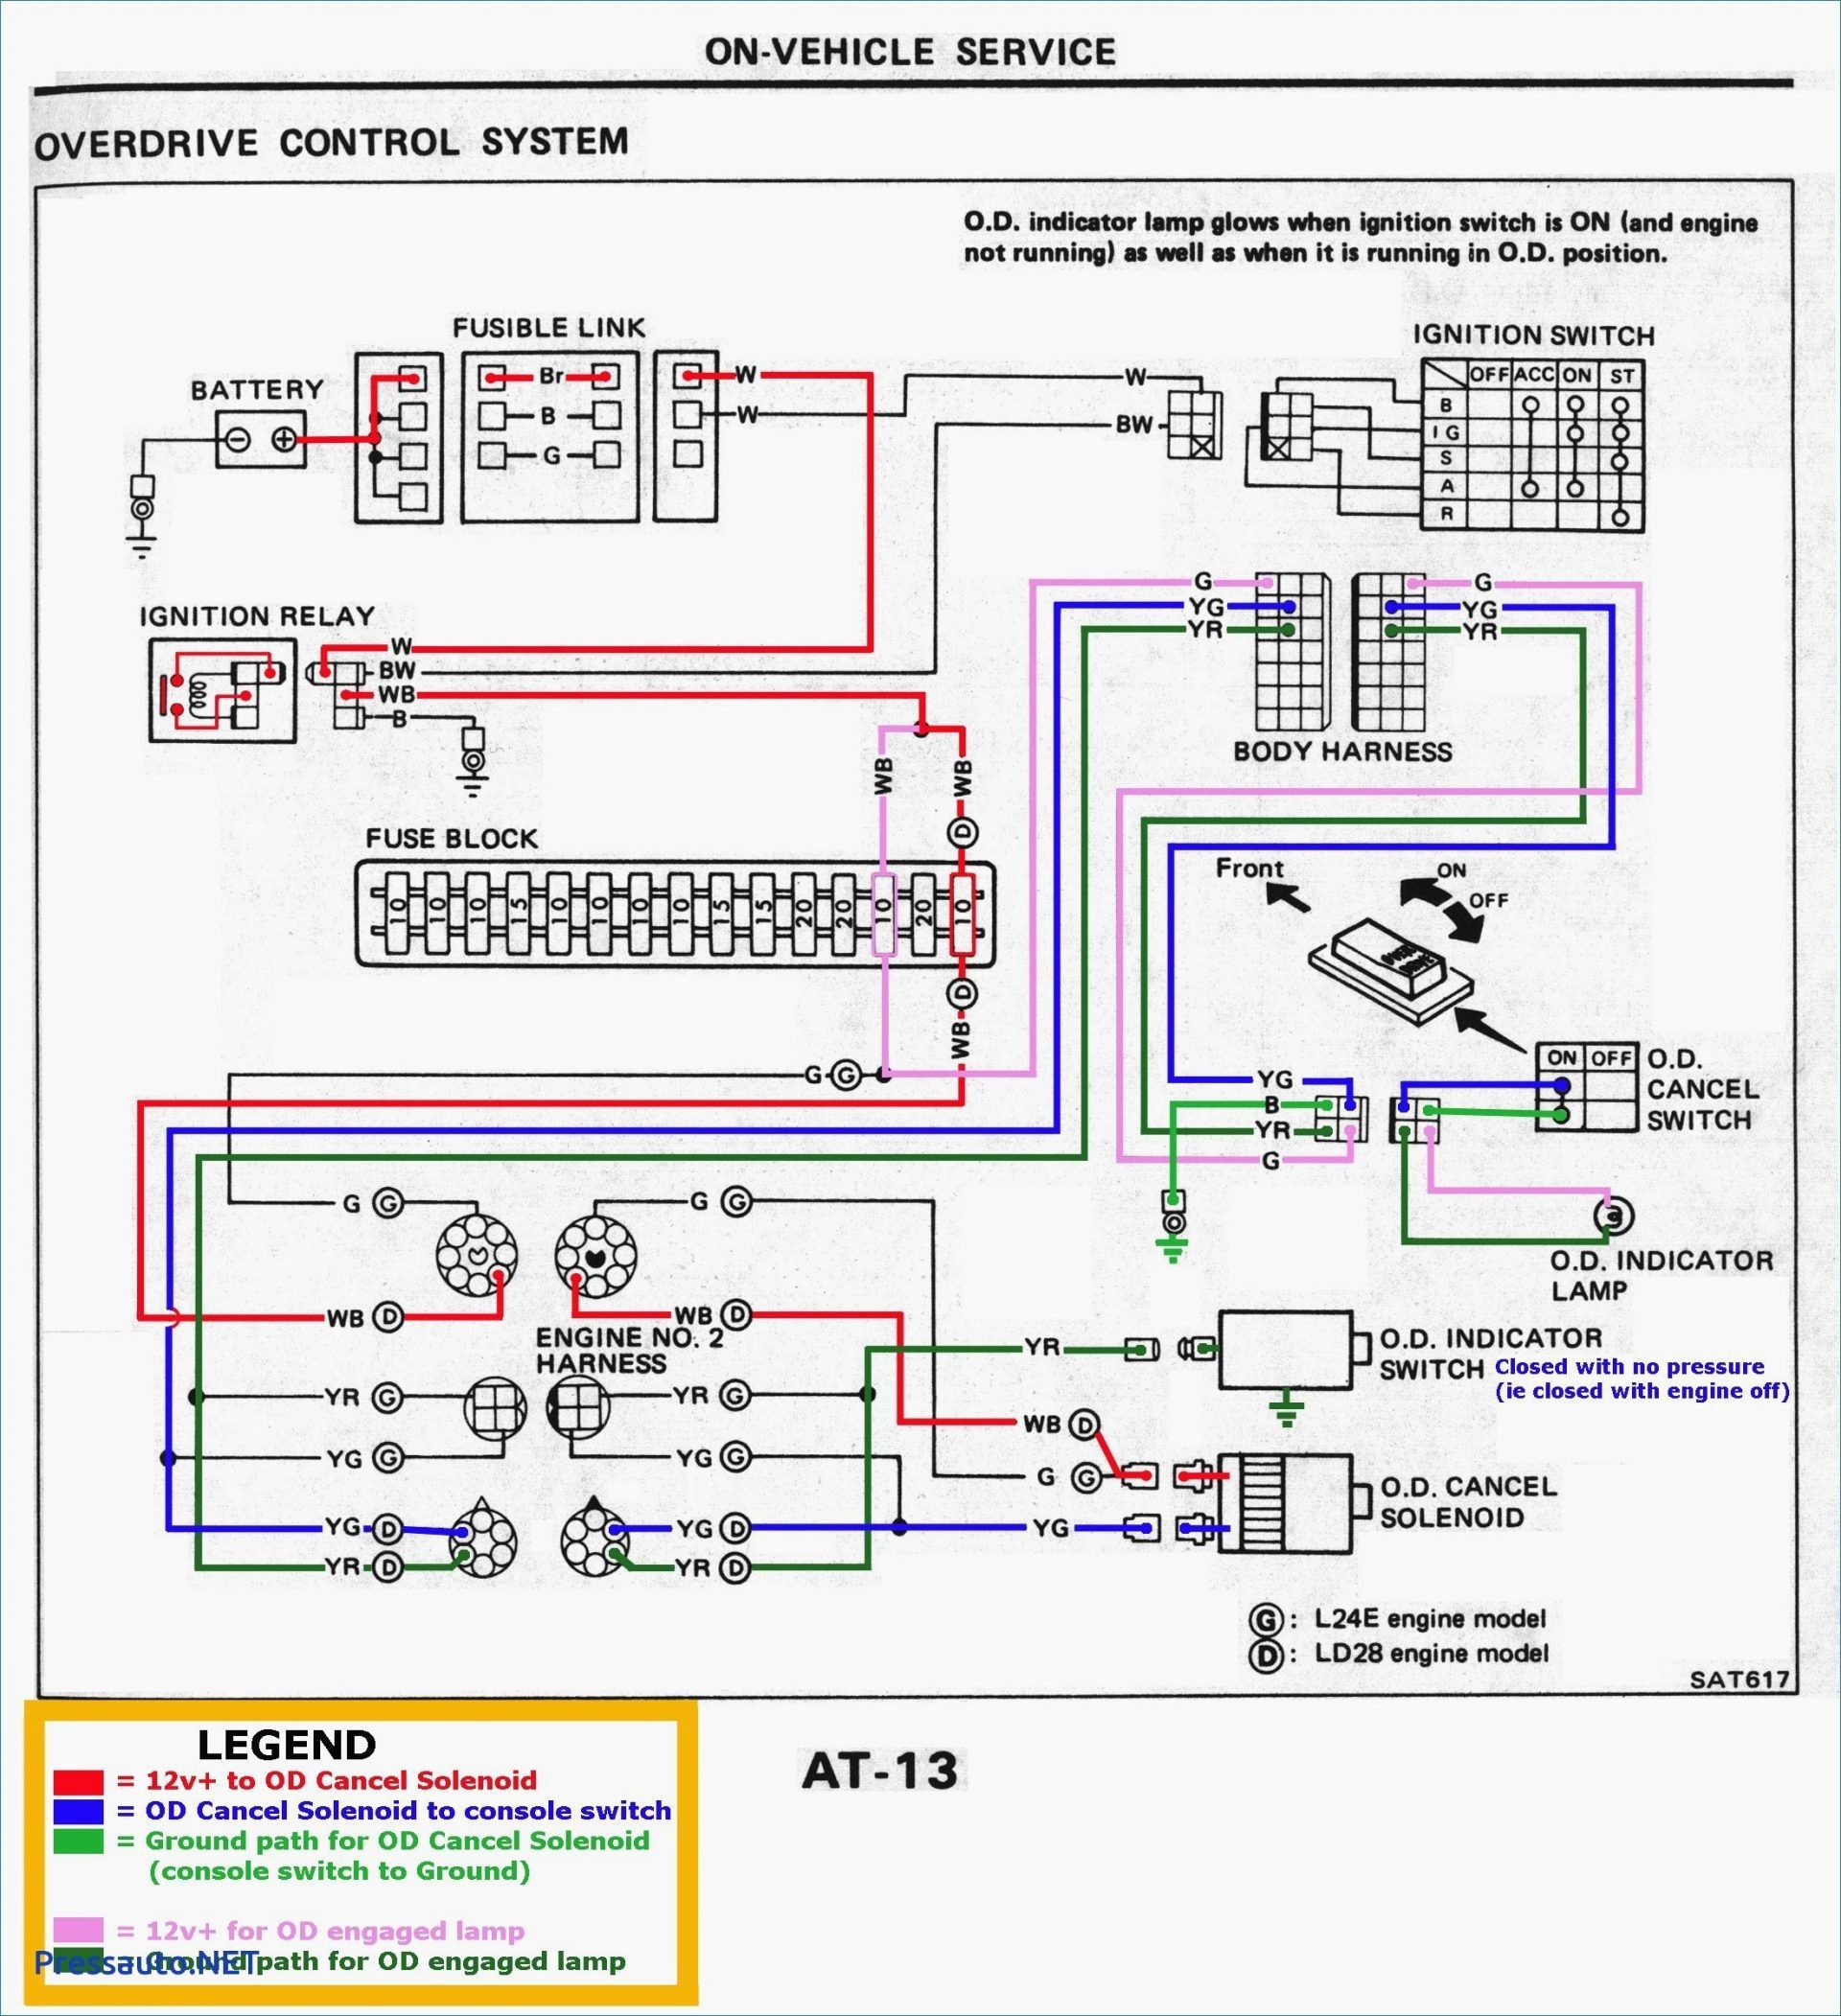 Wiring Diagram for A Relay for Fog Lights New Wiring Diagram for Trailer Light Plug Fresh